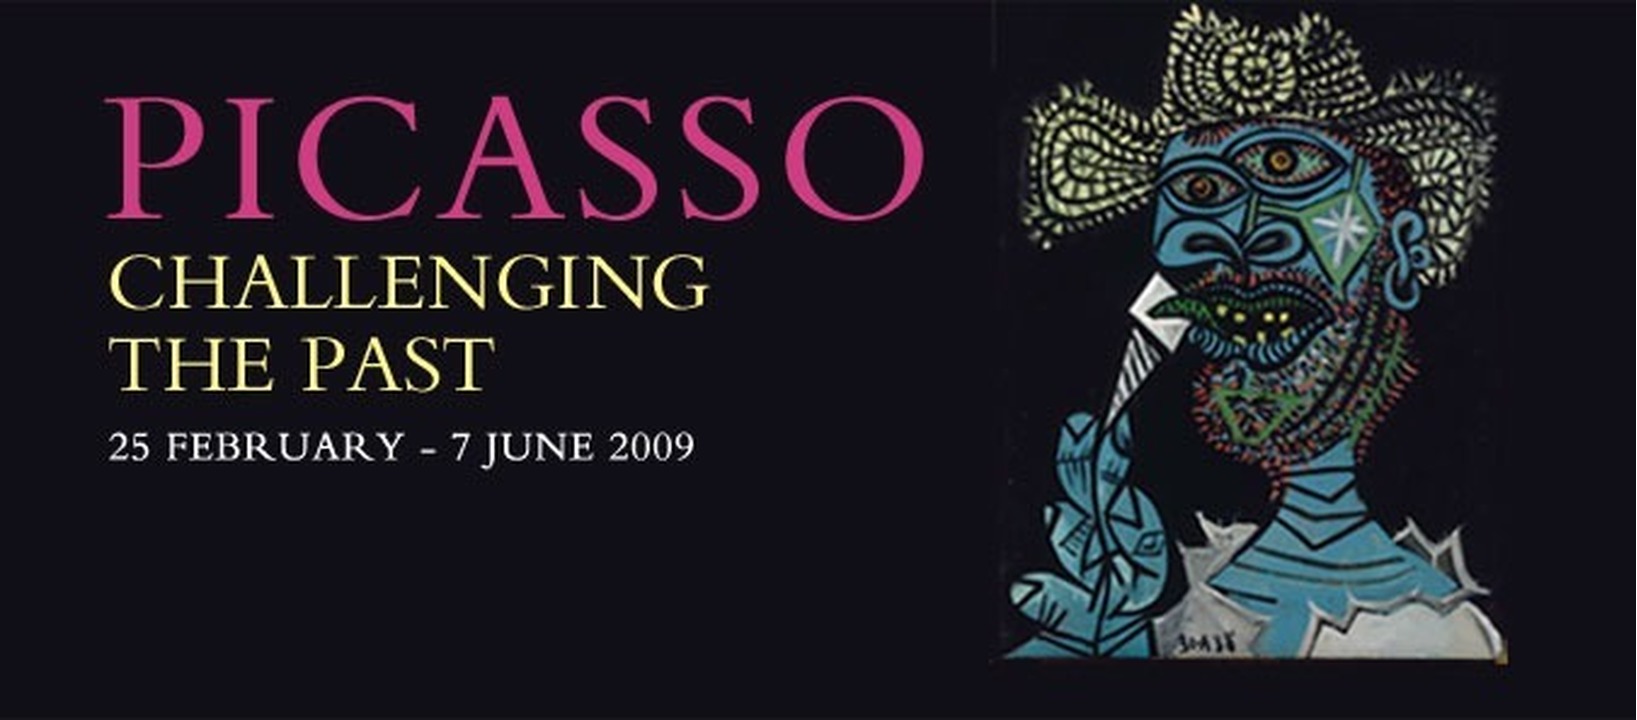 Picasso: challenging the past